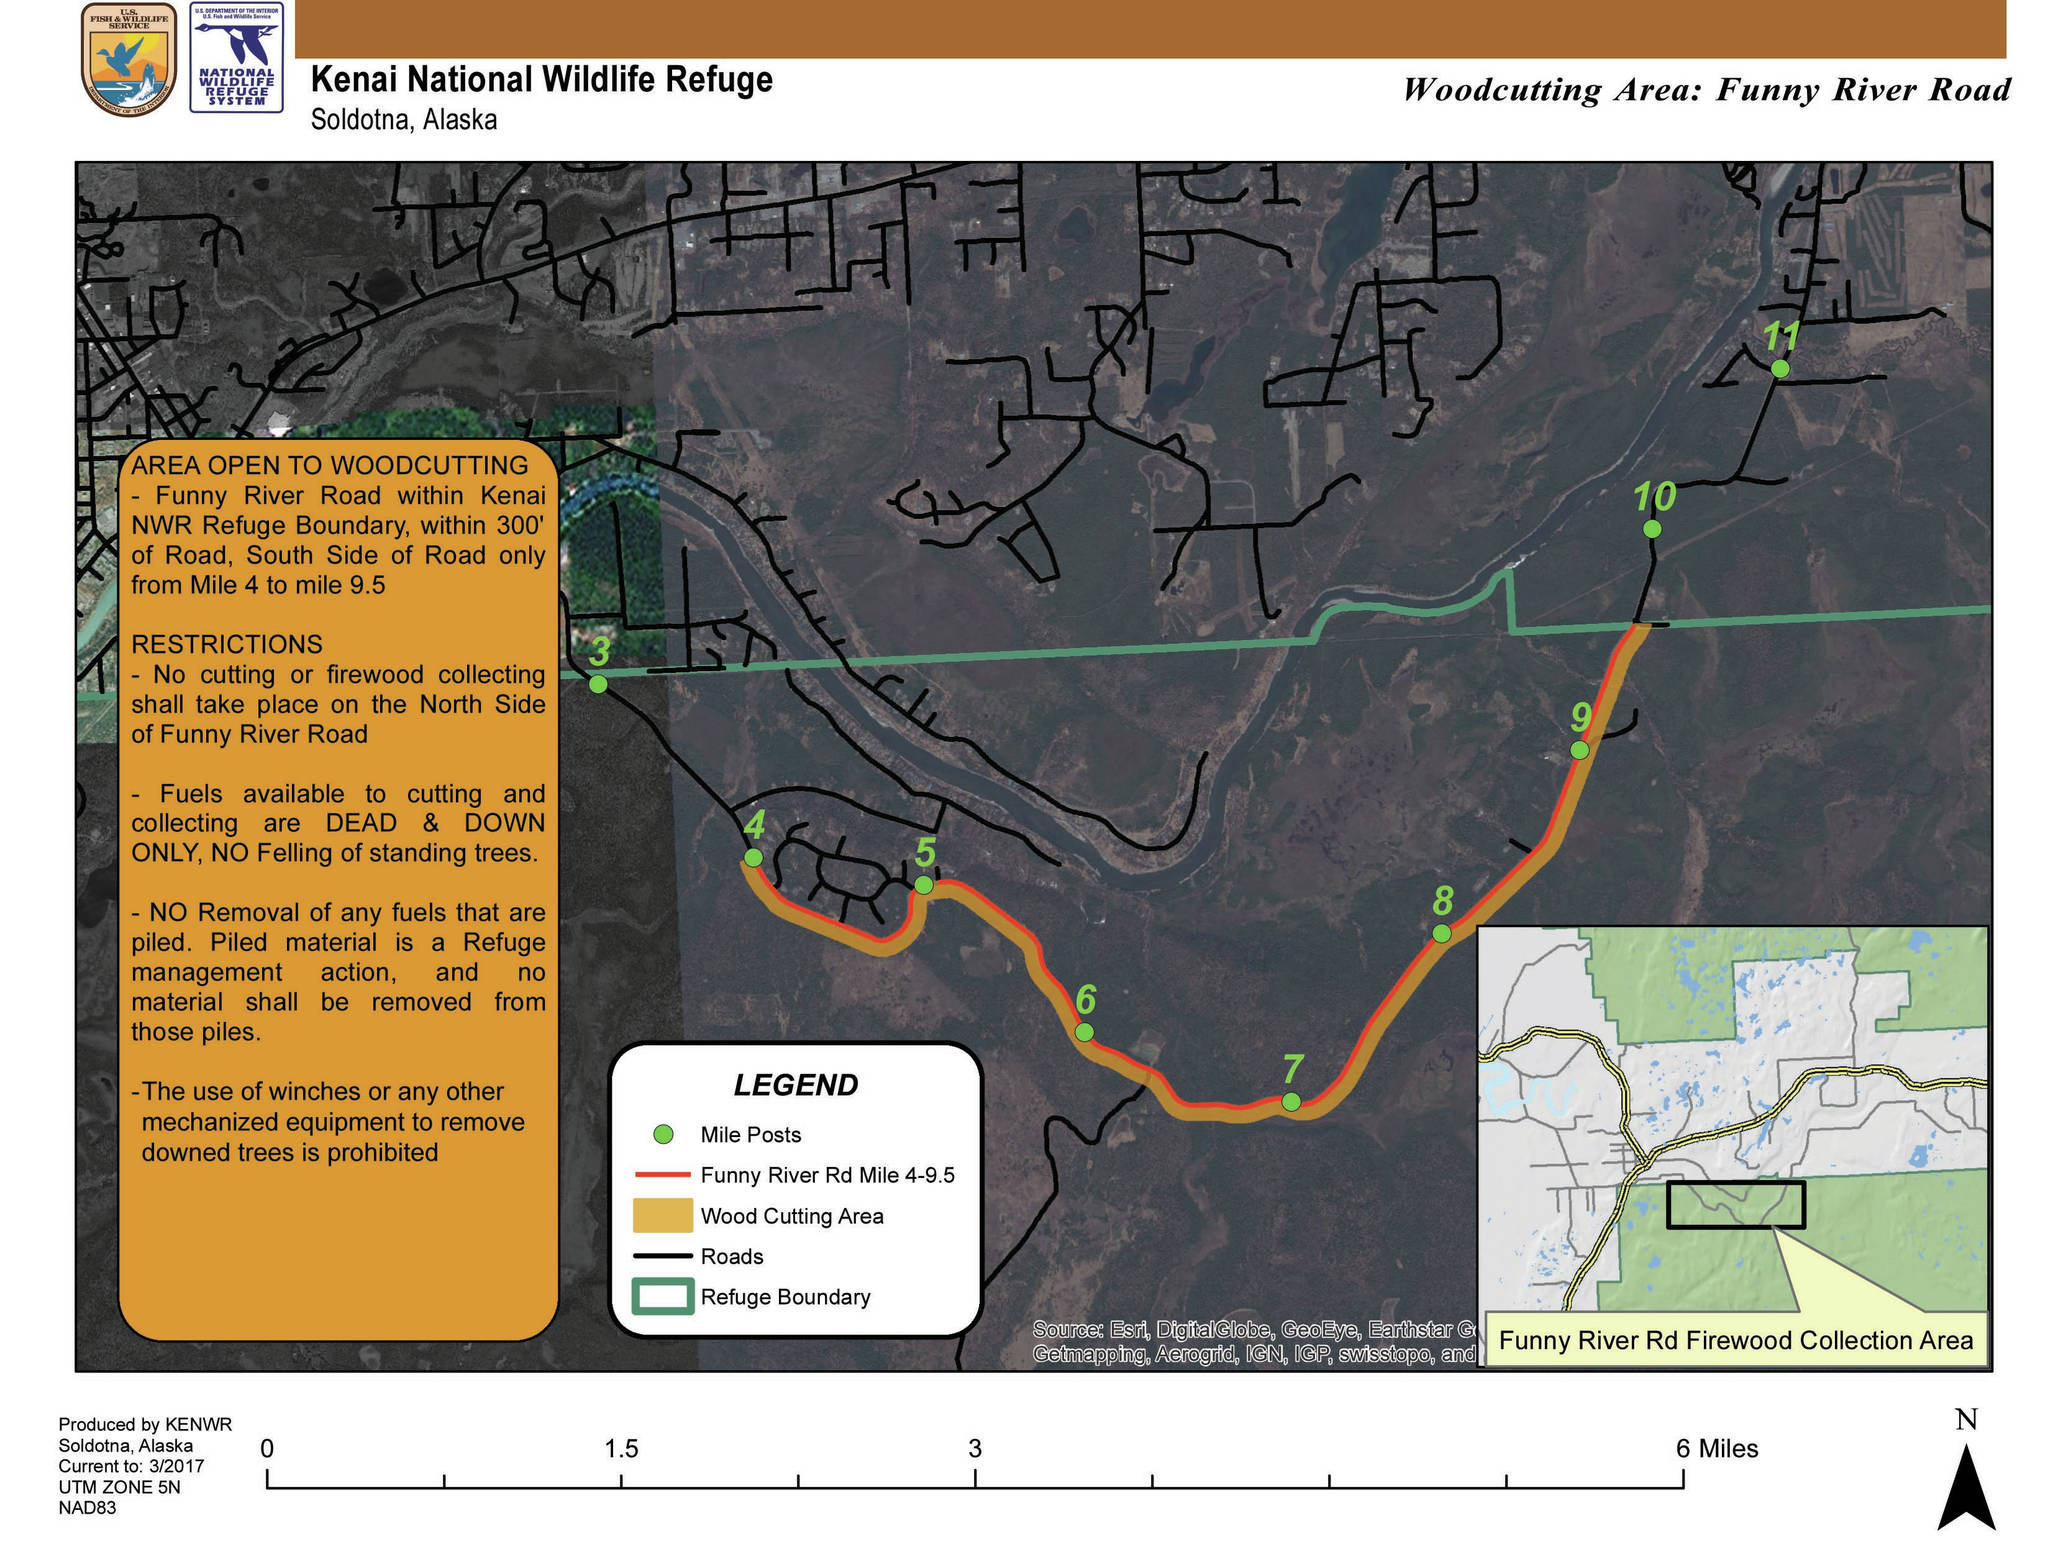 A map shows the Funny River Road woodcutting area. (Image courtesy Kenai National Wildlife Refuge)